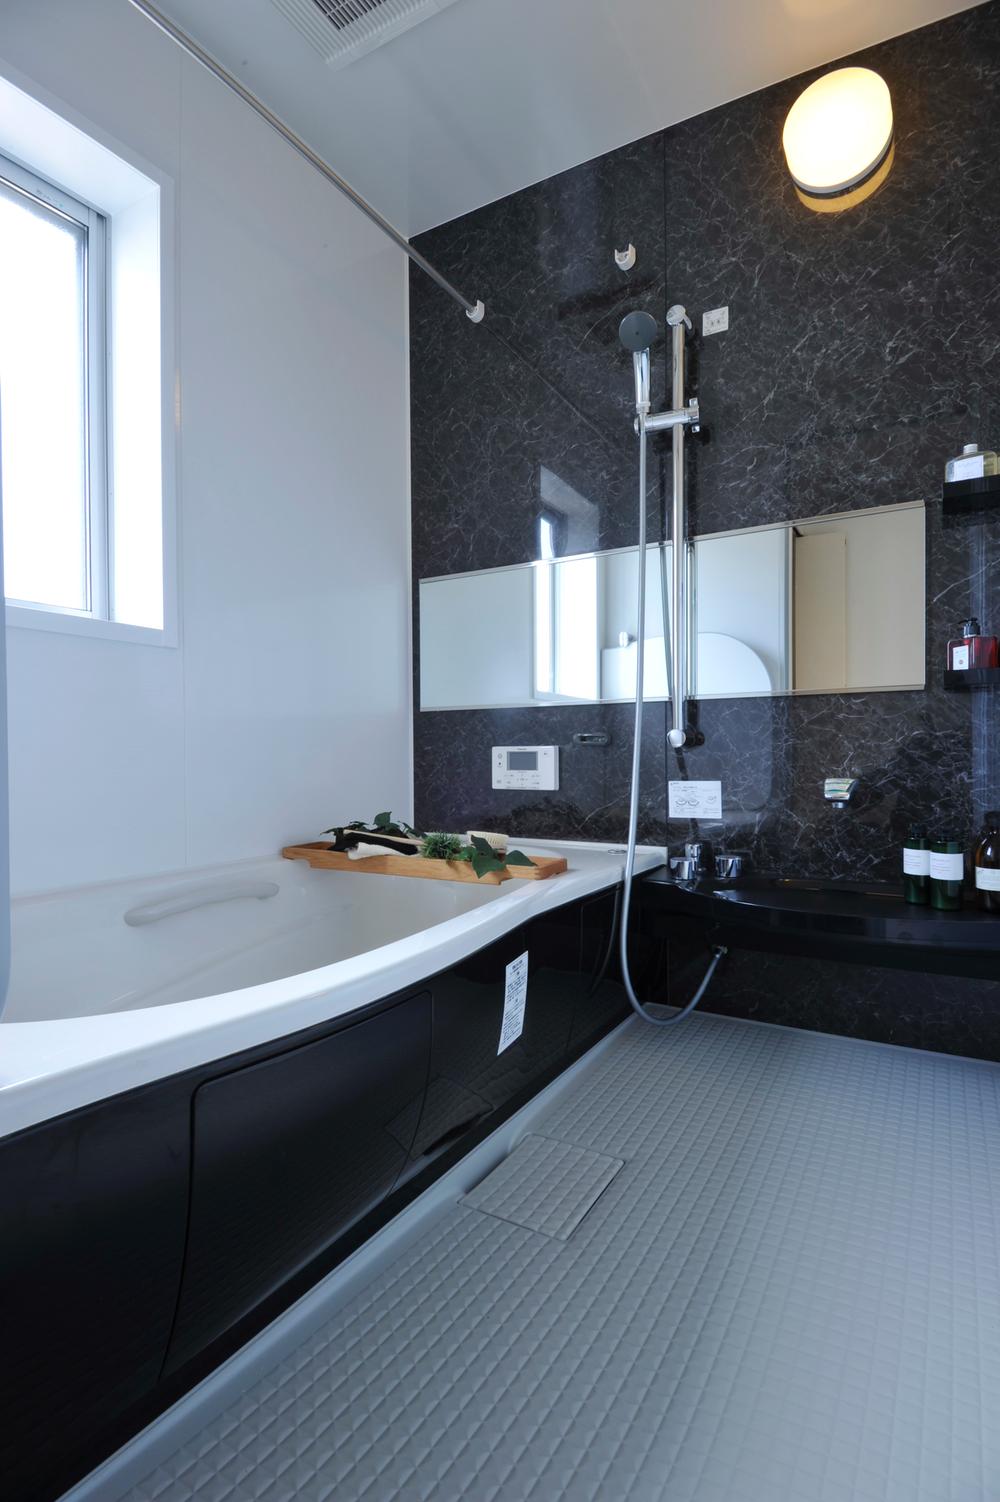 Bathroom. The spacious bathroom, The bathroom heating dryer as standard equipment, Equipped with comfort and functionality.